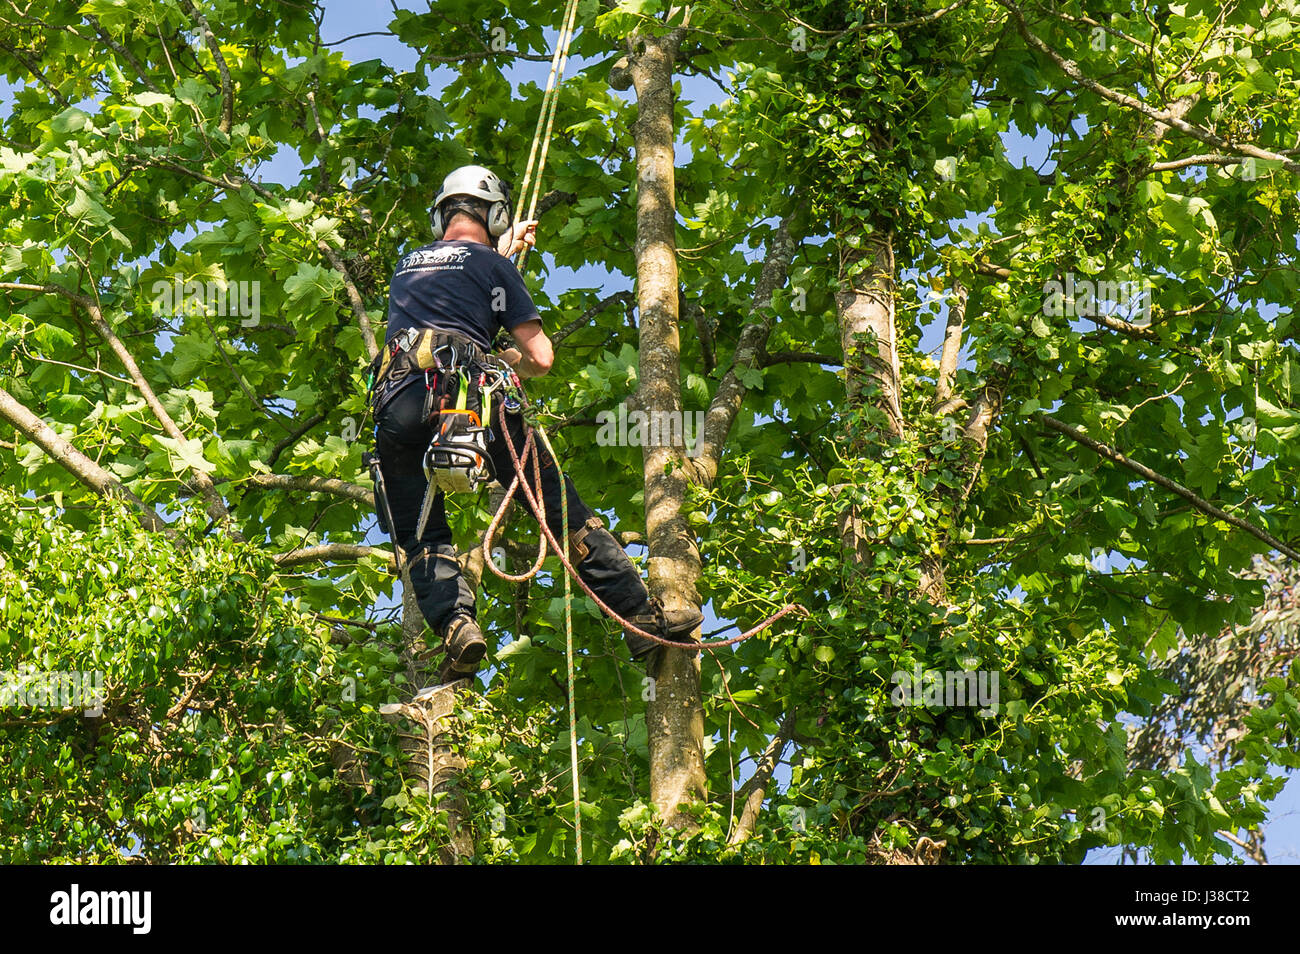 Arboriculturist Tree surgeon Climbing Tree Branches Foliage Rope Ropes Roped Safety harness Manual worker Protective workwear Equipment; Stock Photo